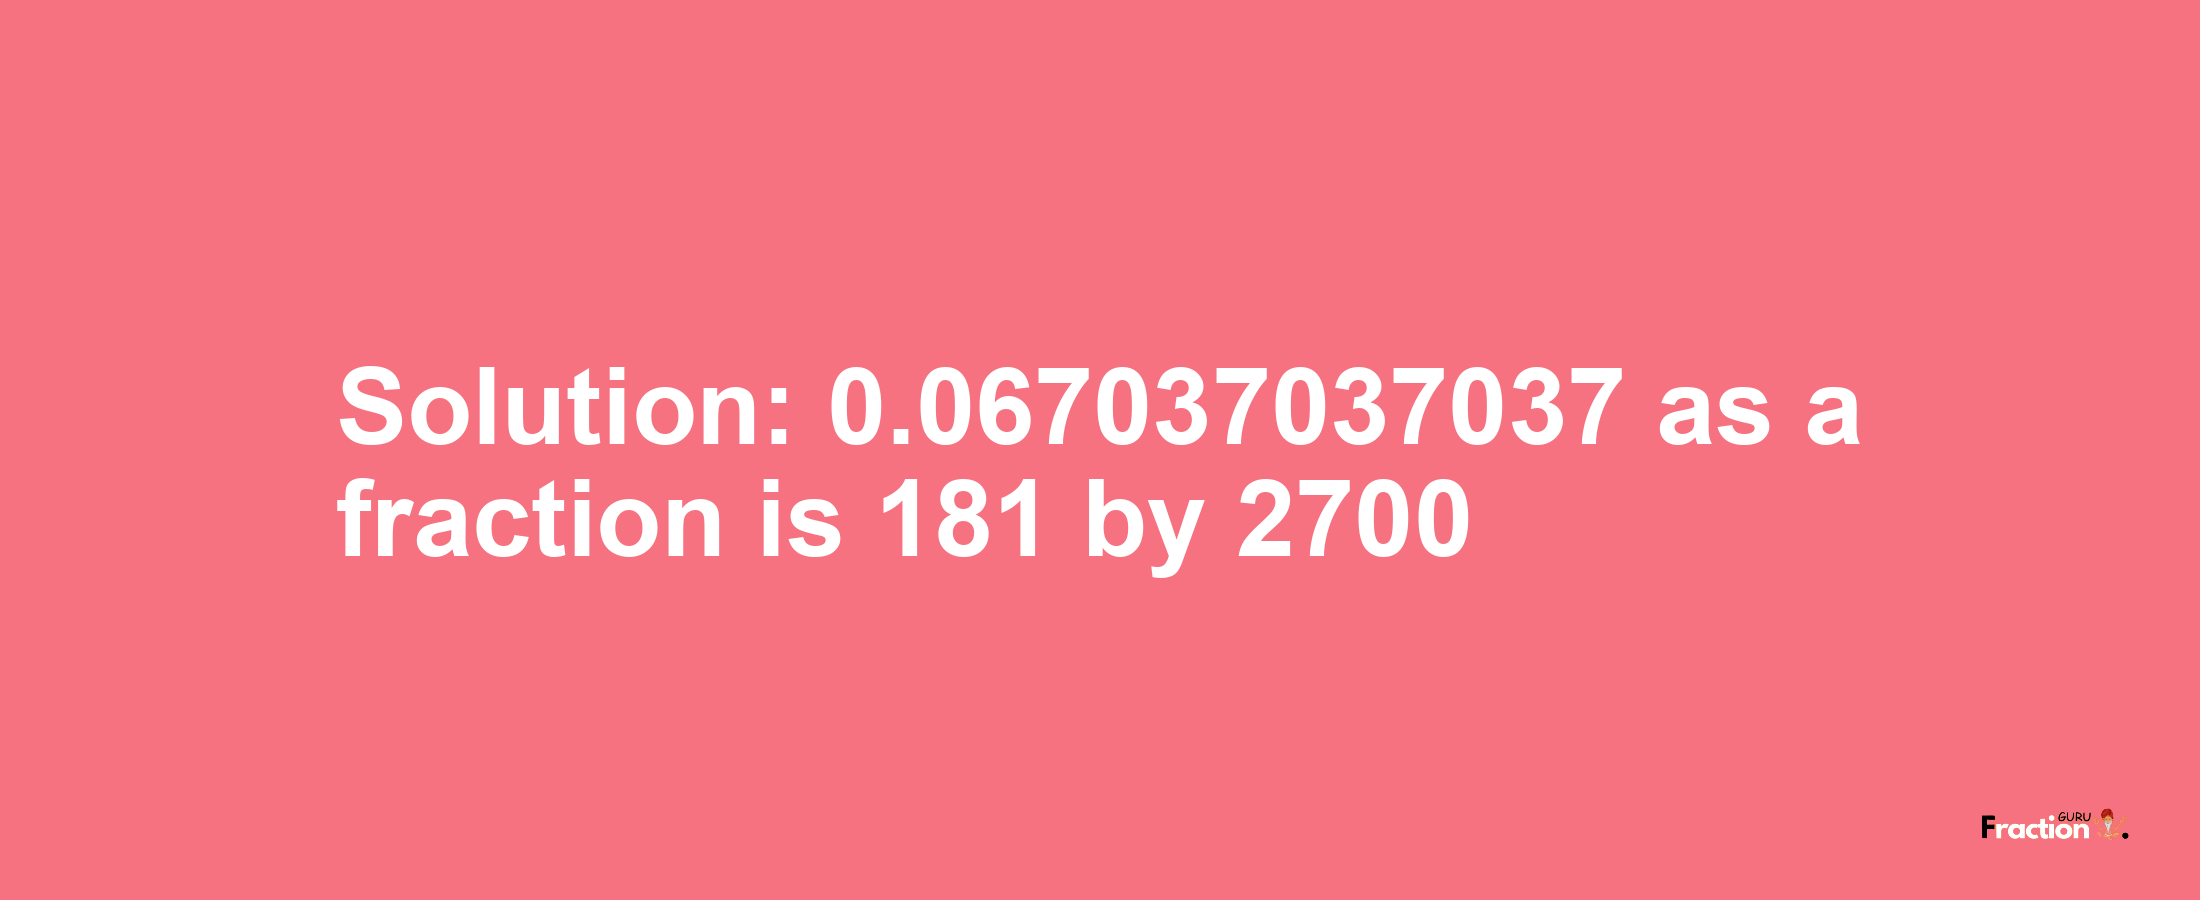 Solution:0.067037037037 as a fraction is 181/2700